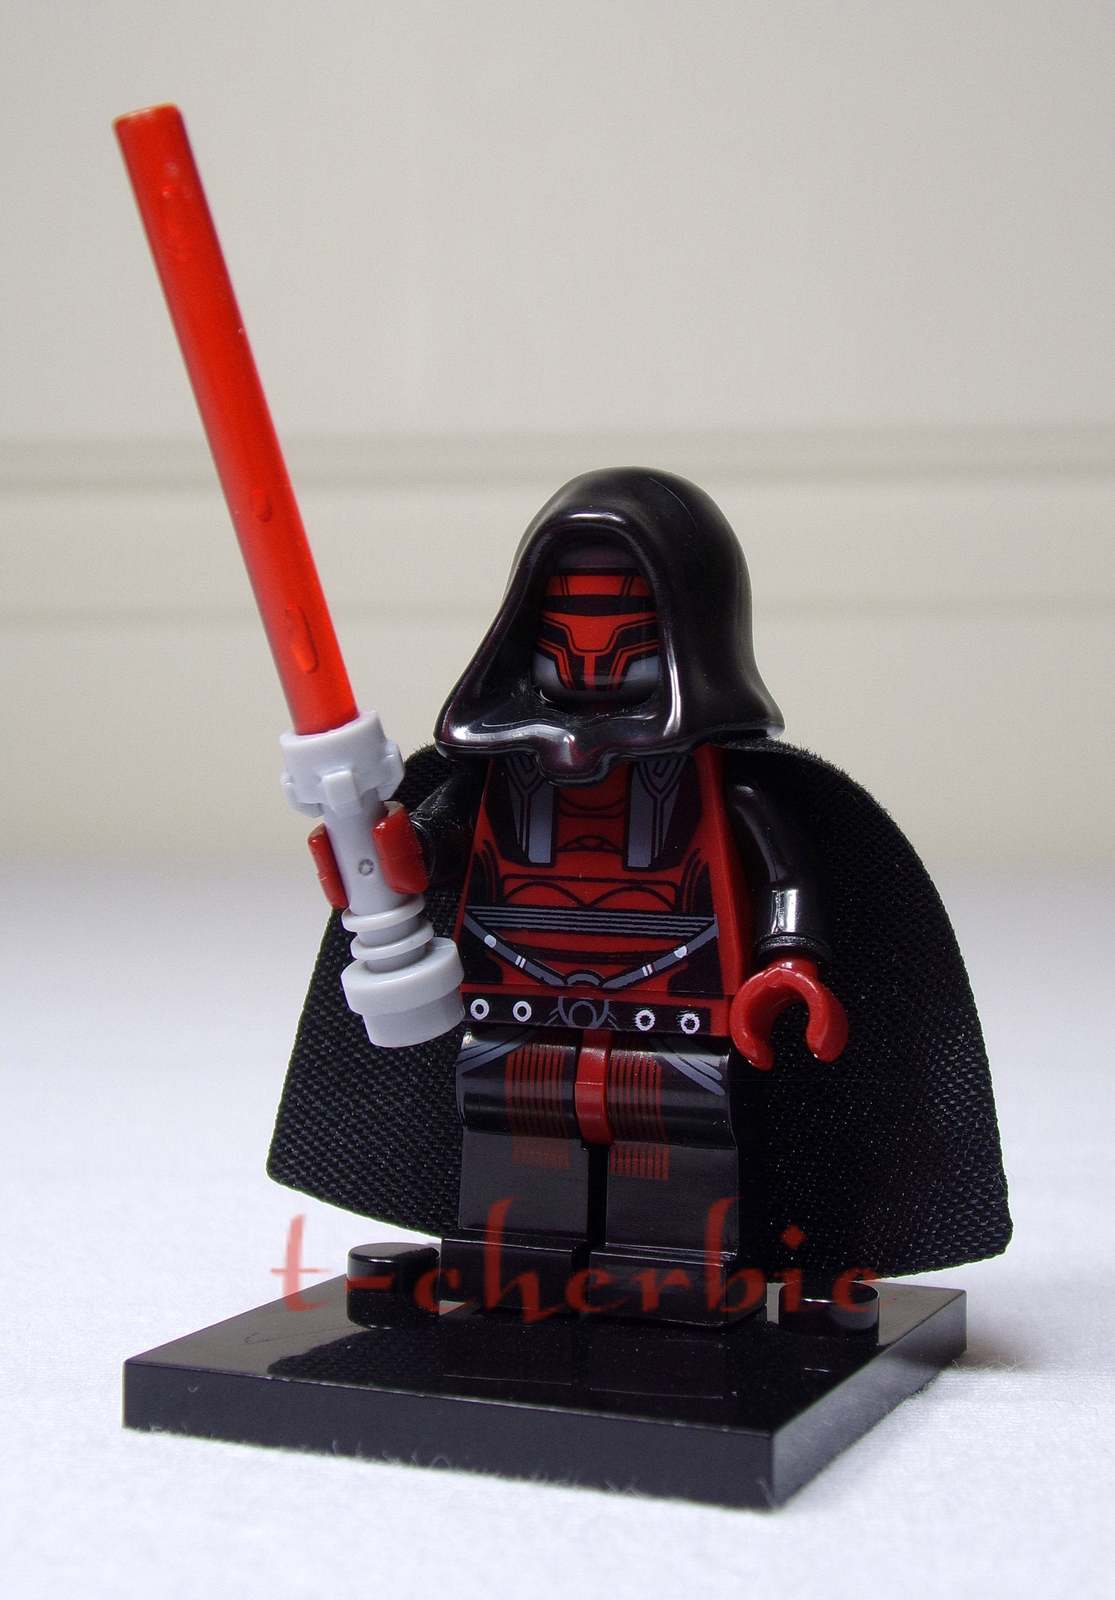 DARTH REVAN Star Wars Minifigure +Stand Sith Lord Knights of the Old Republic